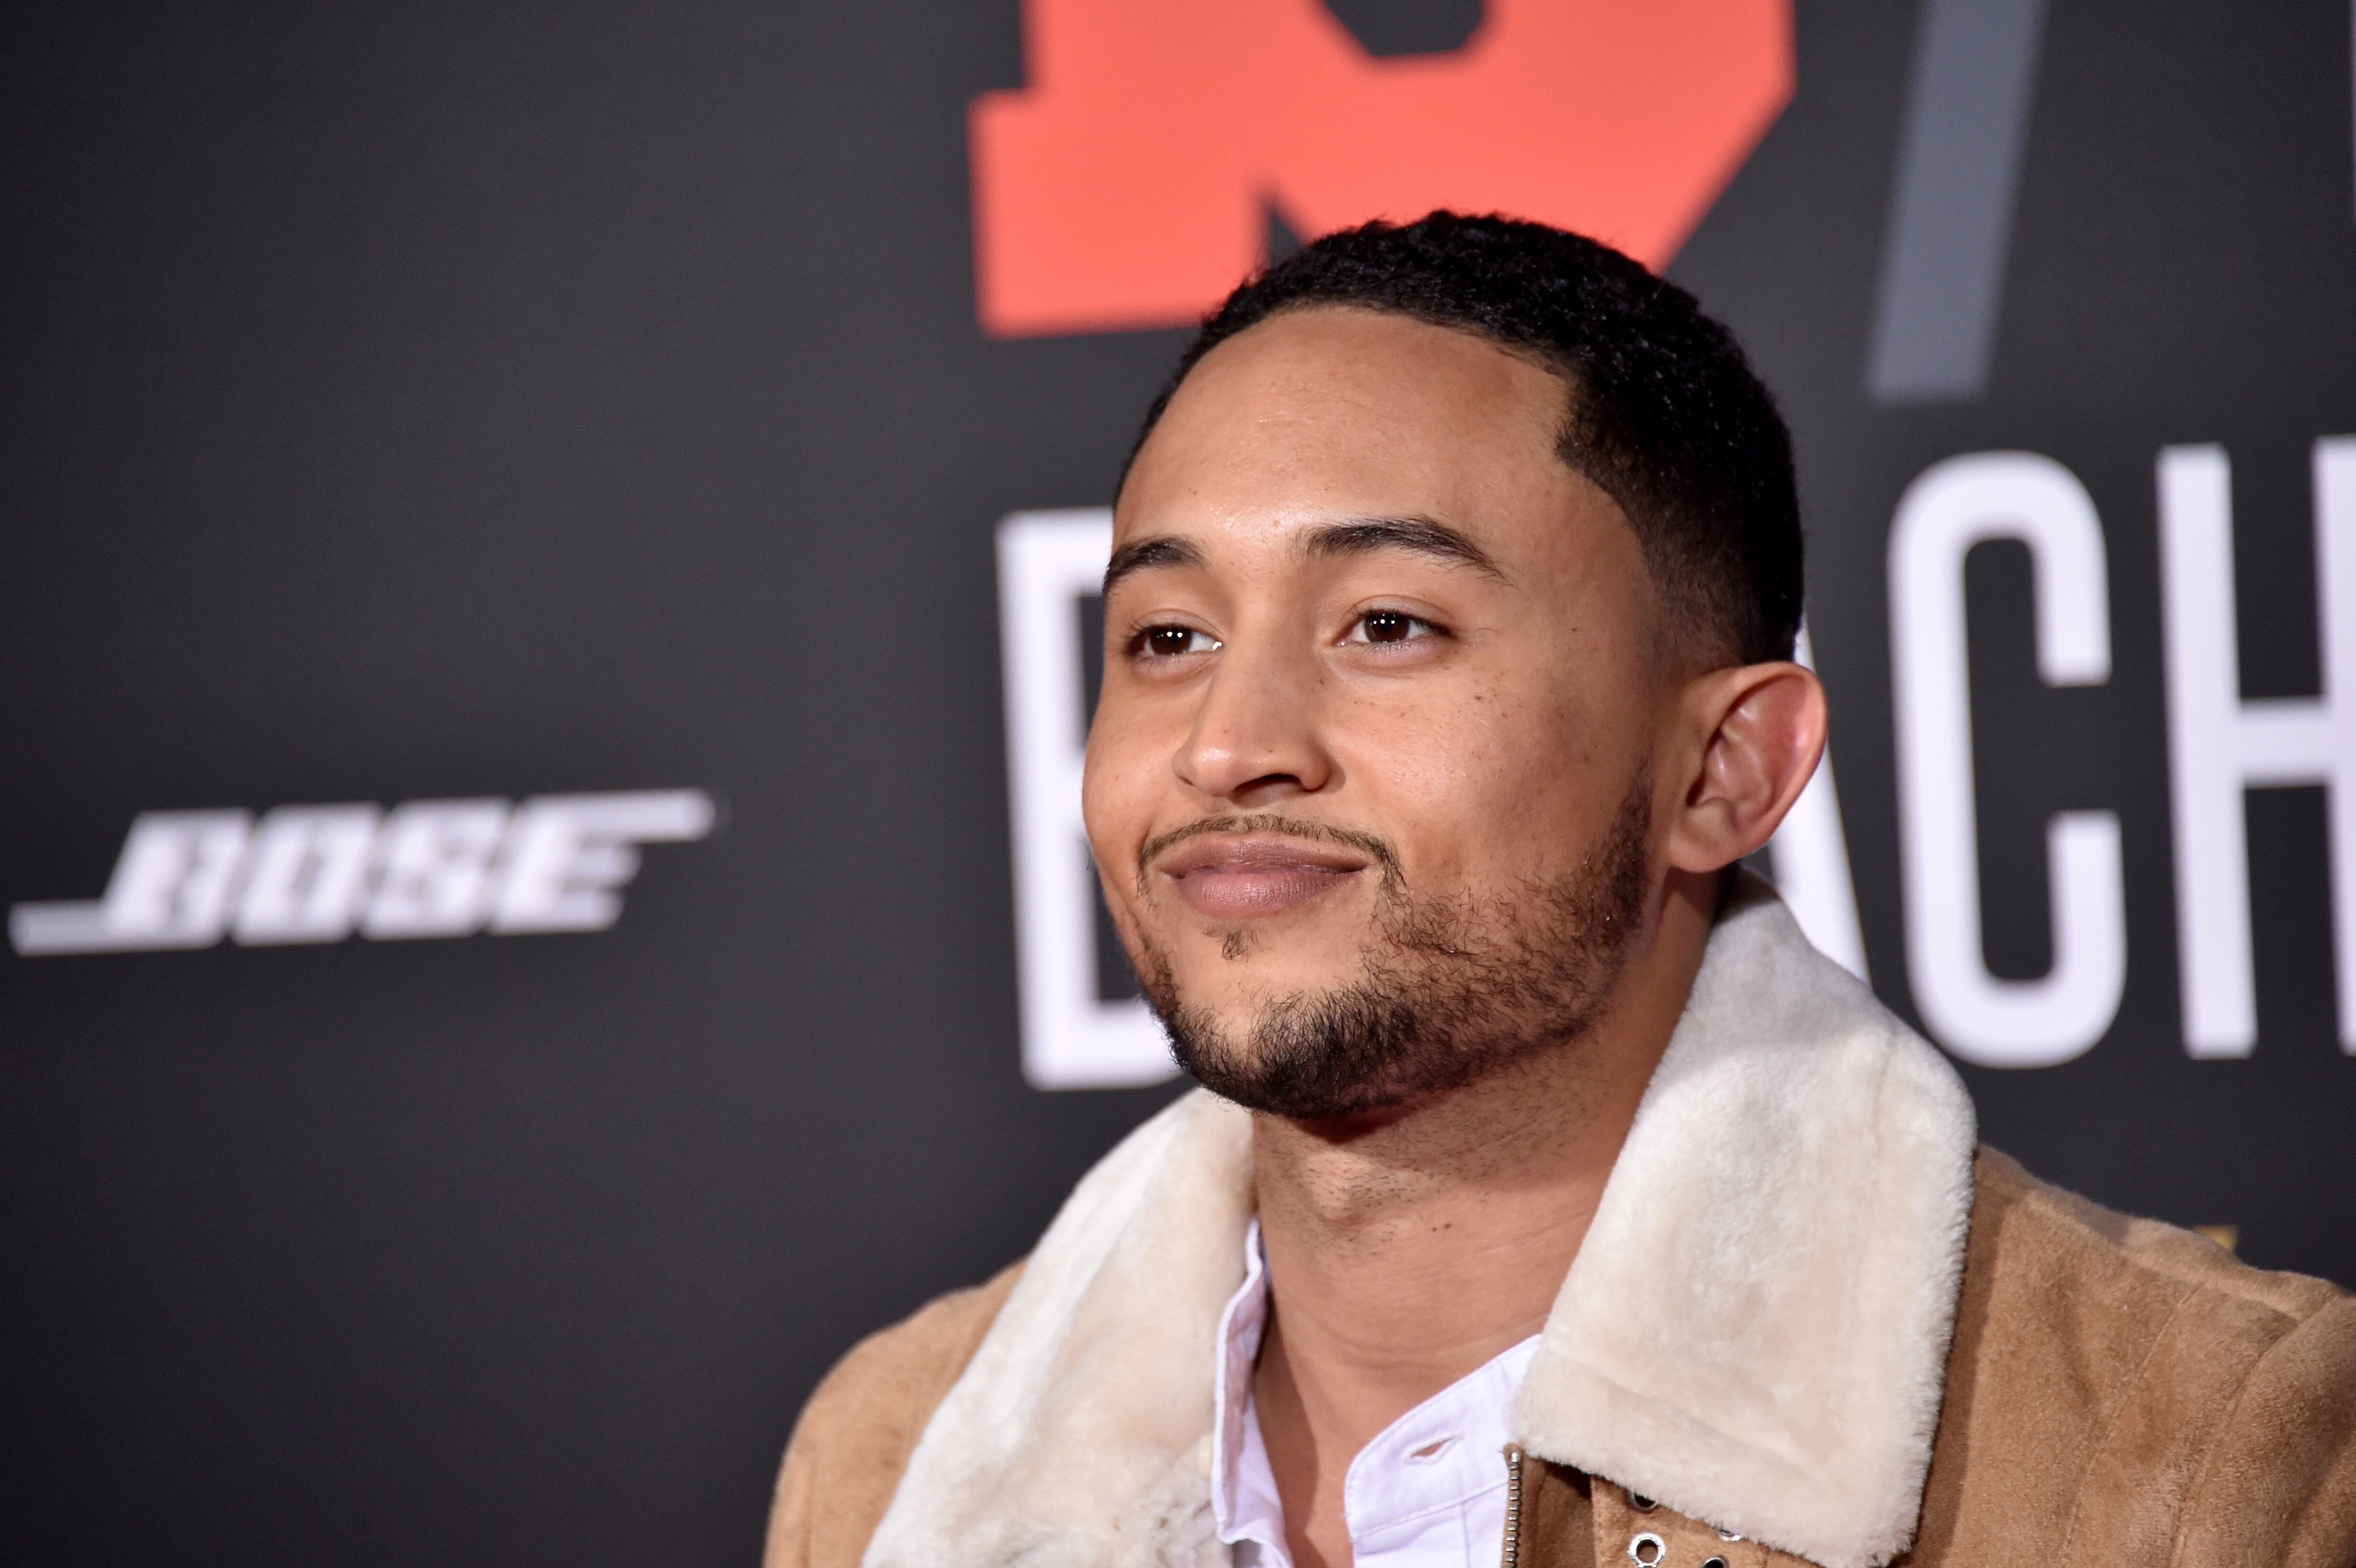 Tahj Mowry attends a red carpet event | Source: Getty Images/GlobalImagesUkraine